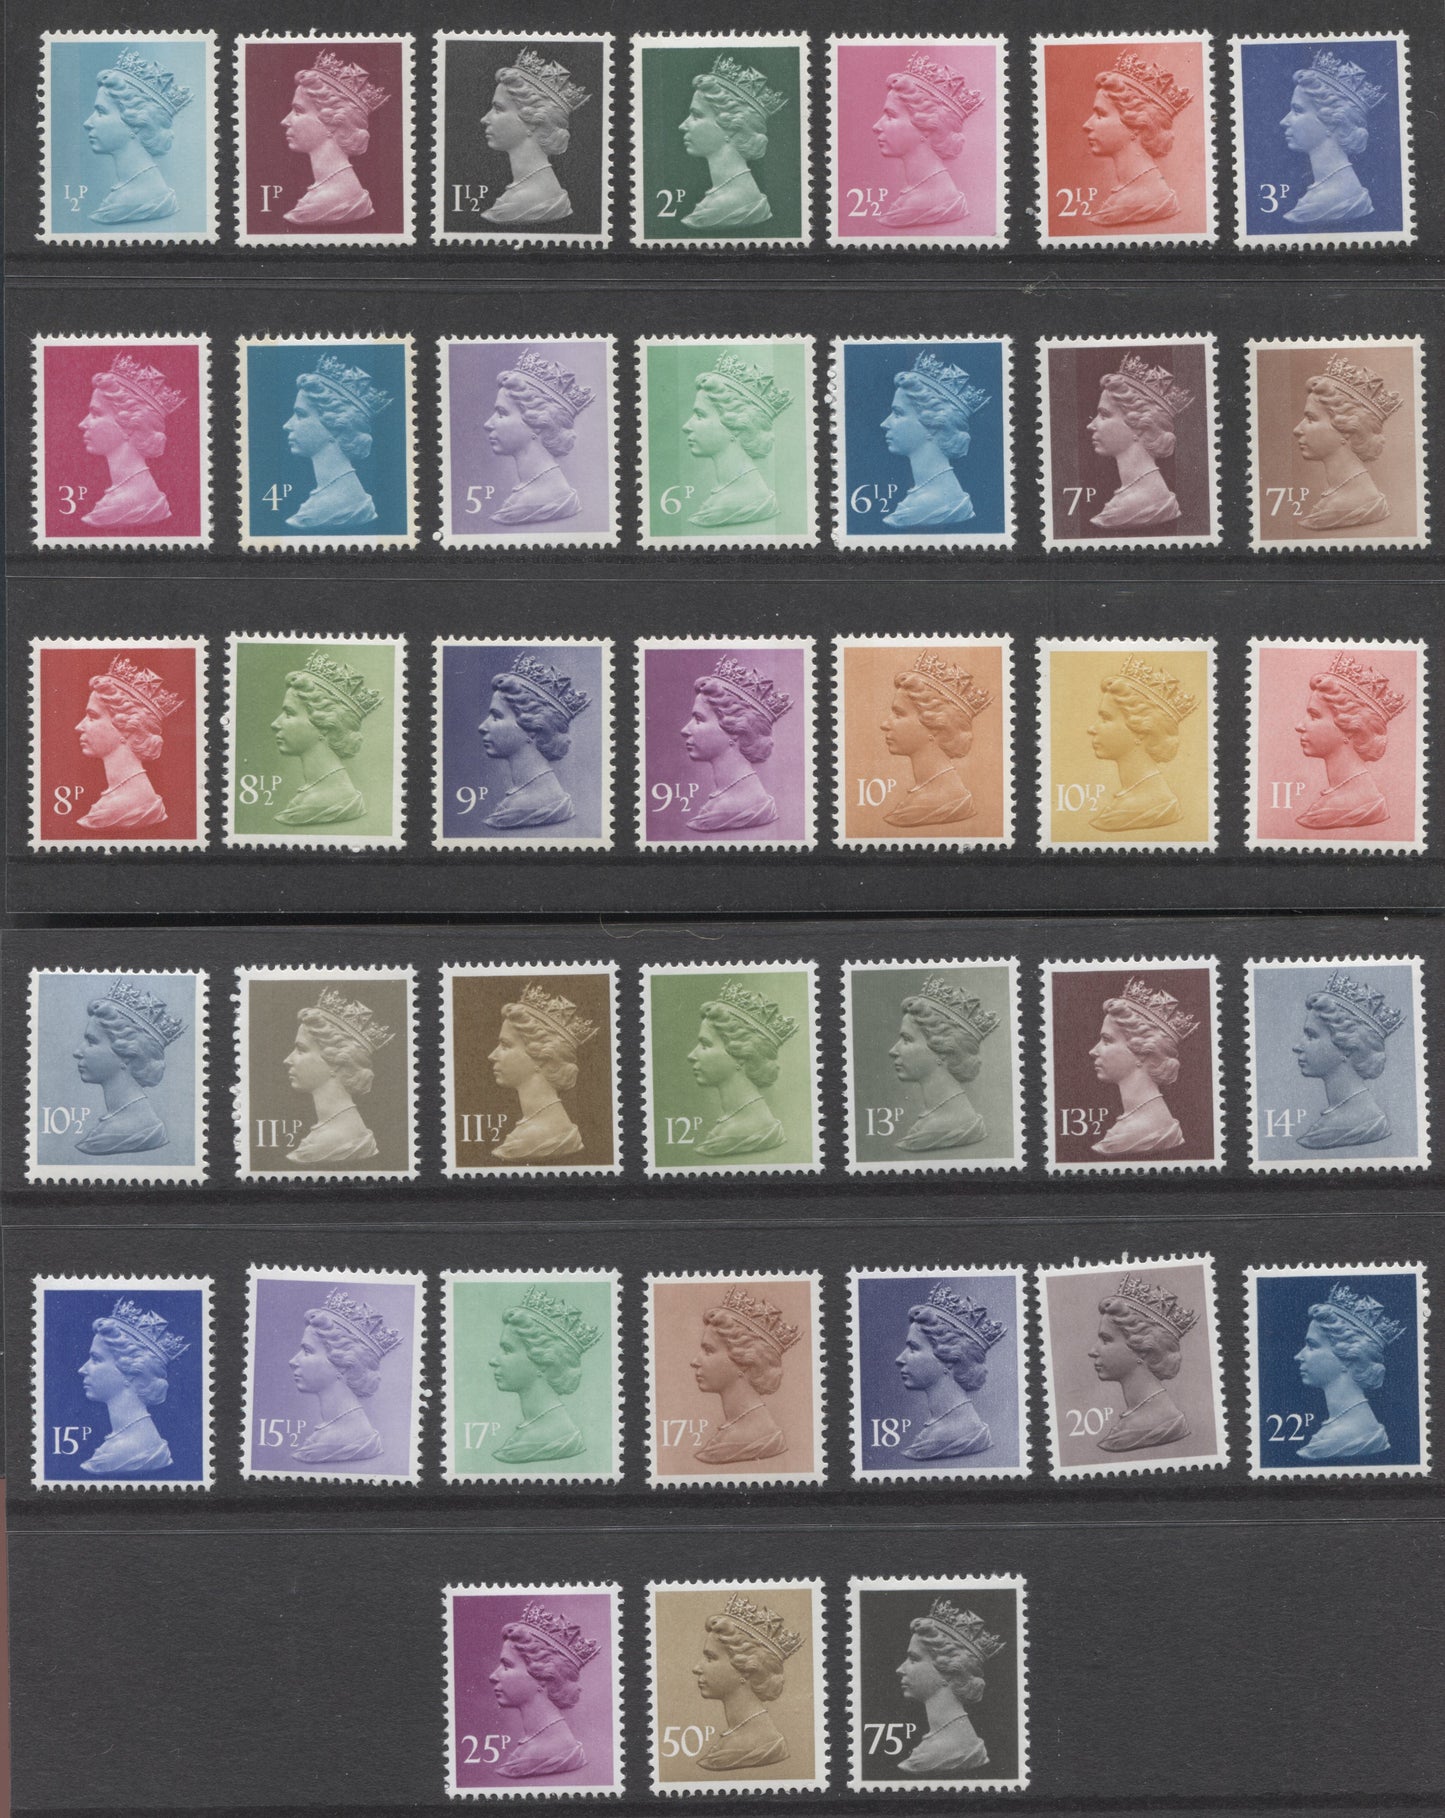 Lot 374 Great Britain 1977-1981 Presentation Packs 90 and 129a Containing Low and Mid-Value Machin Definitives, Converted 2018 Gibbons Concise Cat. $33